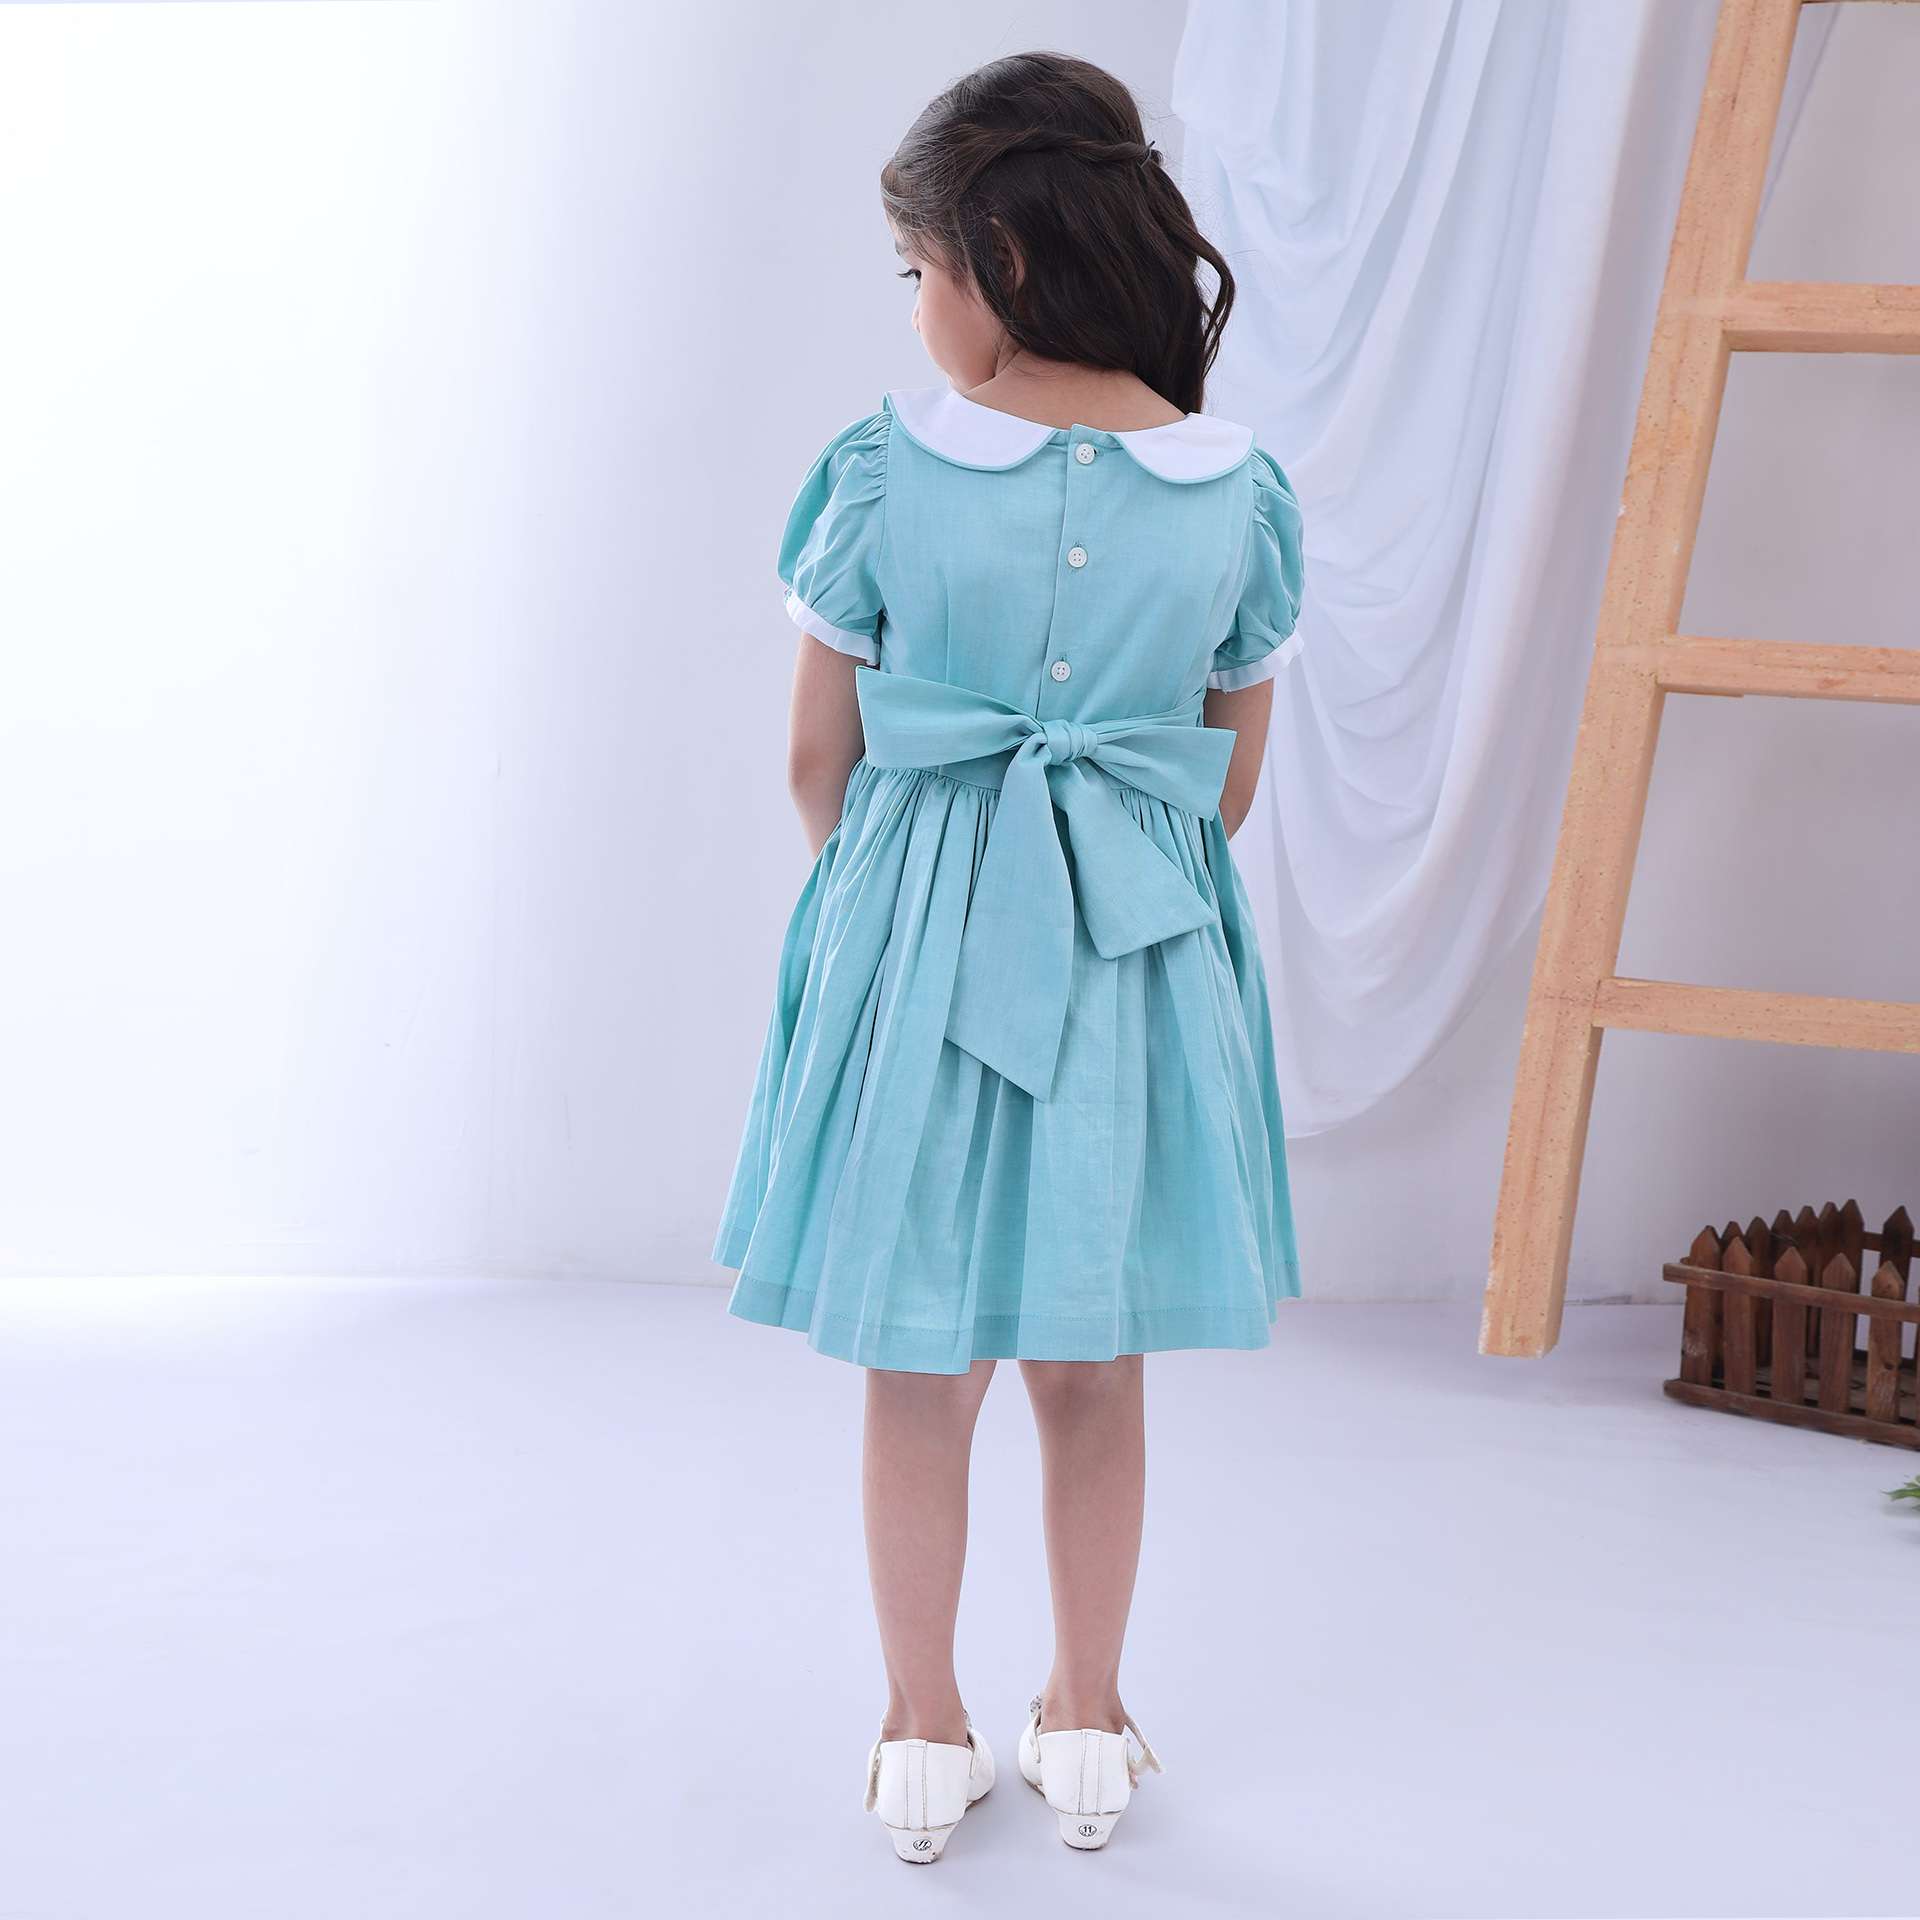 Rear image of a girl in turquoise hand smocked cotton dress